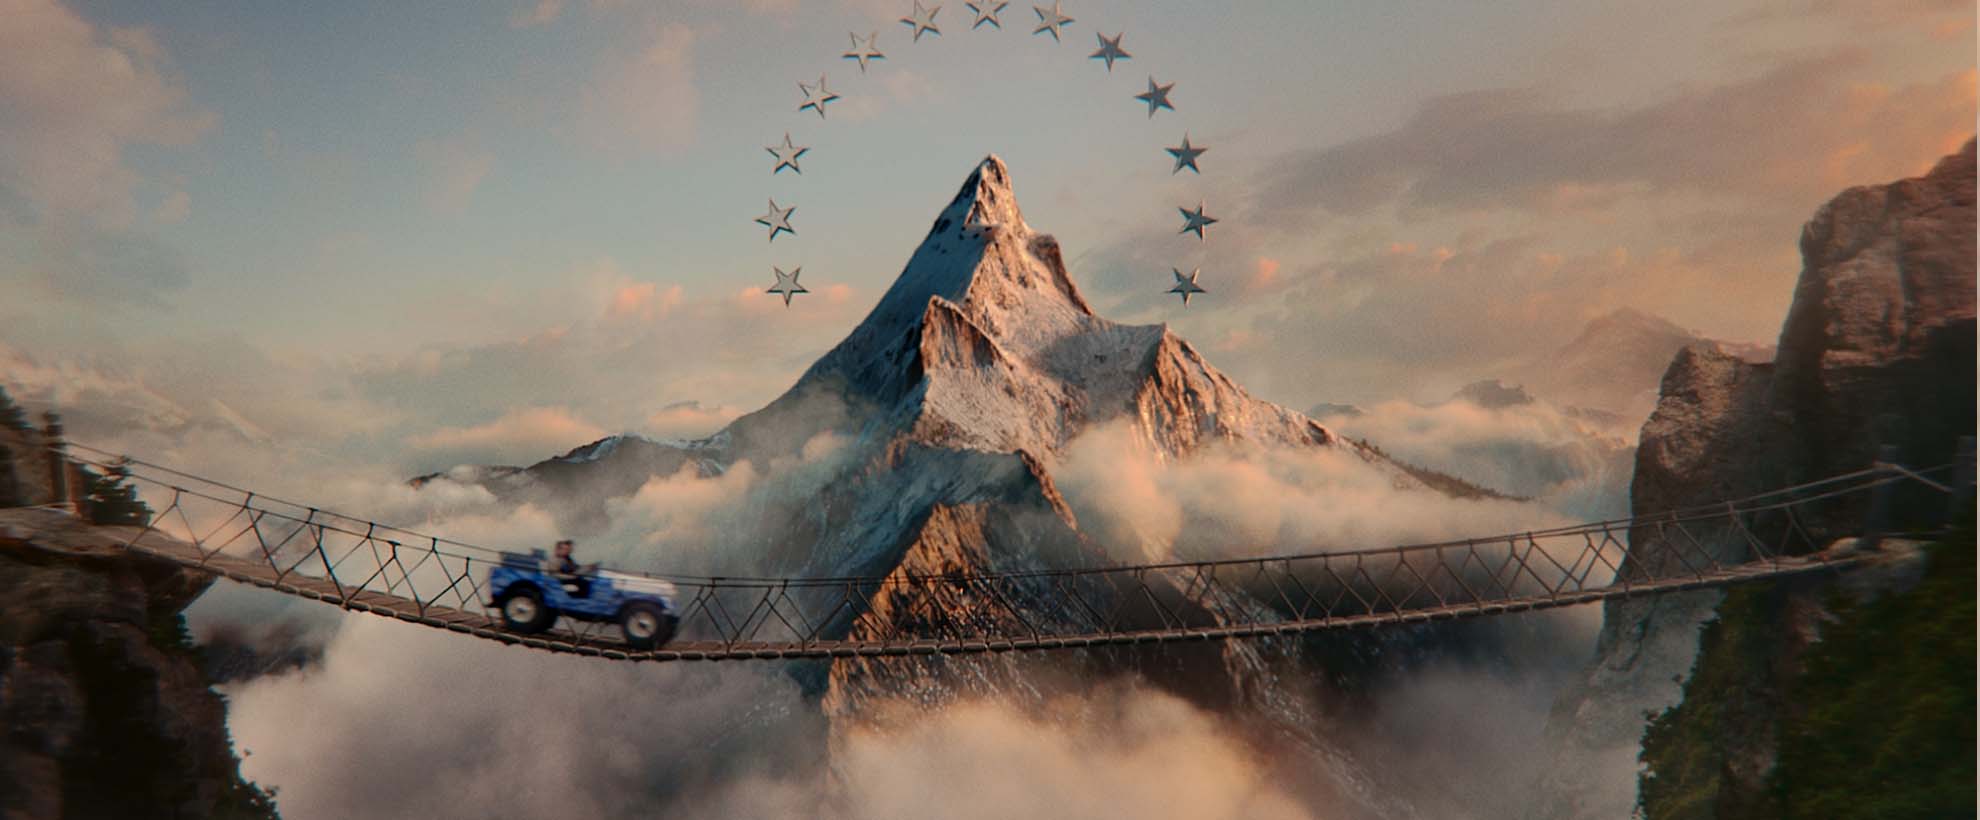 Paramount's mountain with ring of stars, beneath is a wooden suspension bridge with a vintage SUV driving over